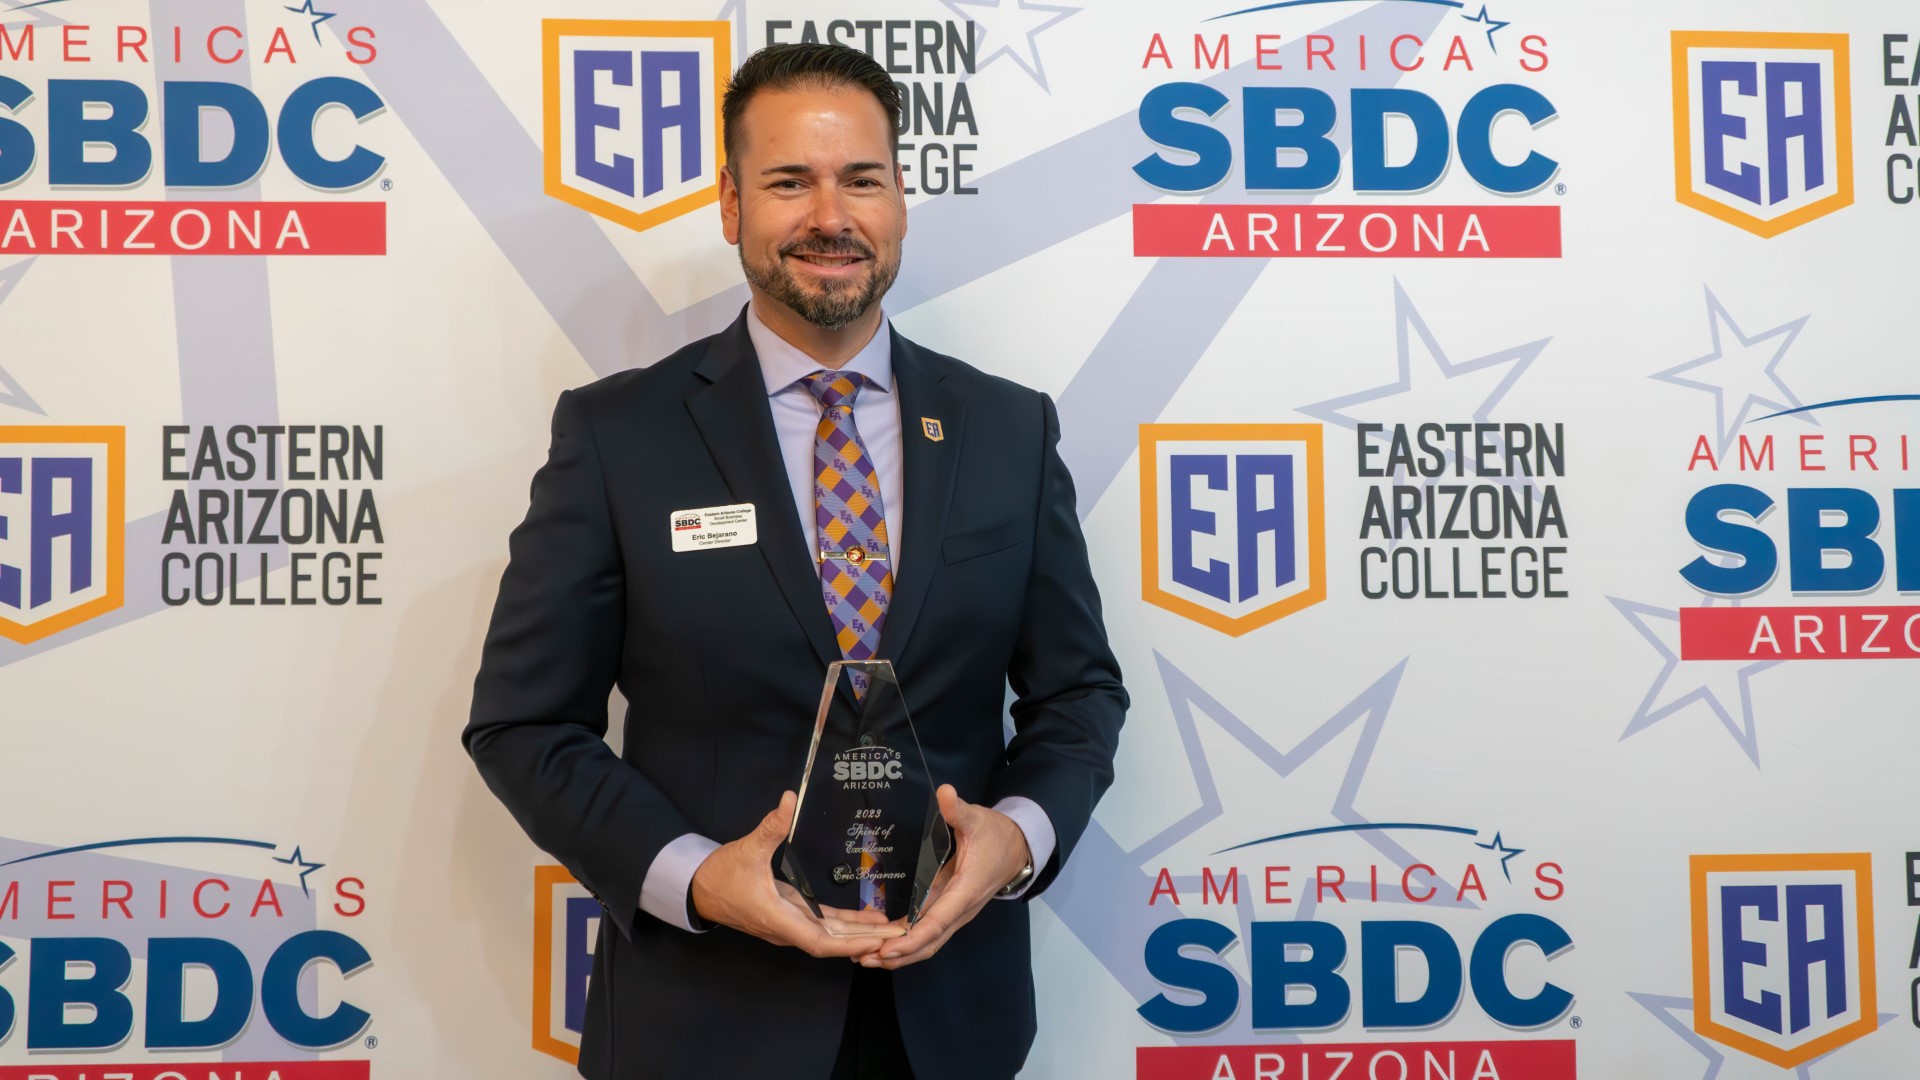 Eric Bejarano of EAC’s SBDC honored with the Spirit of Excellence Award